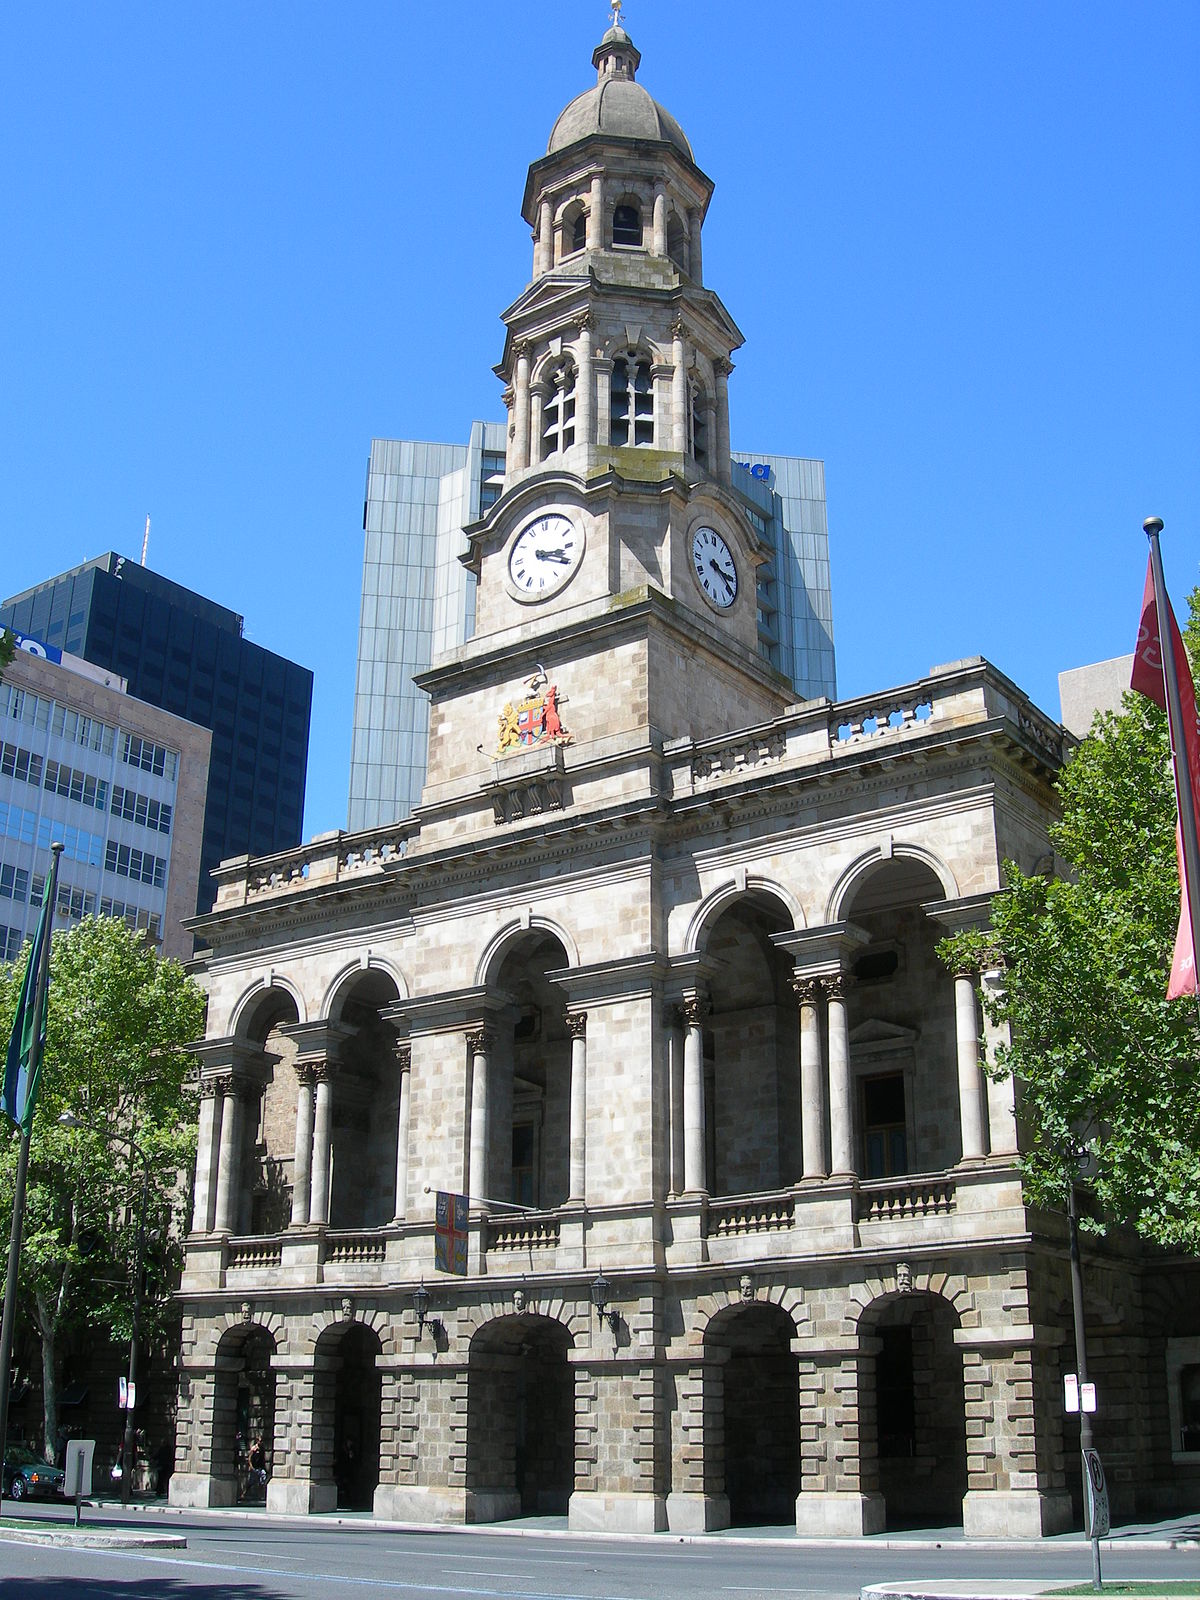 Adelaide Town Hall - Wikipedia